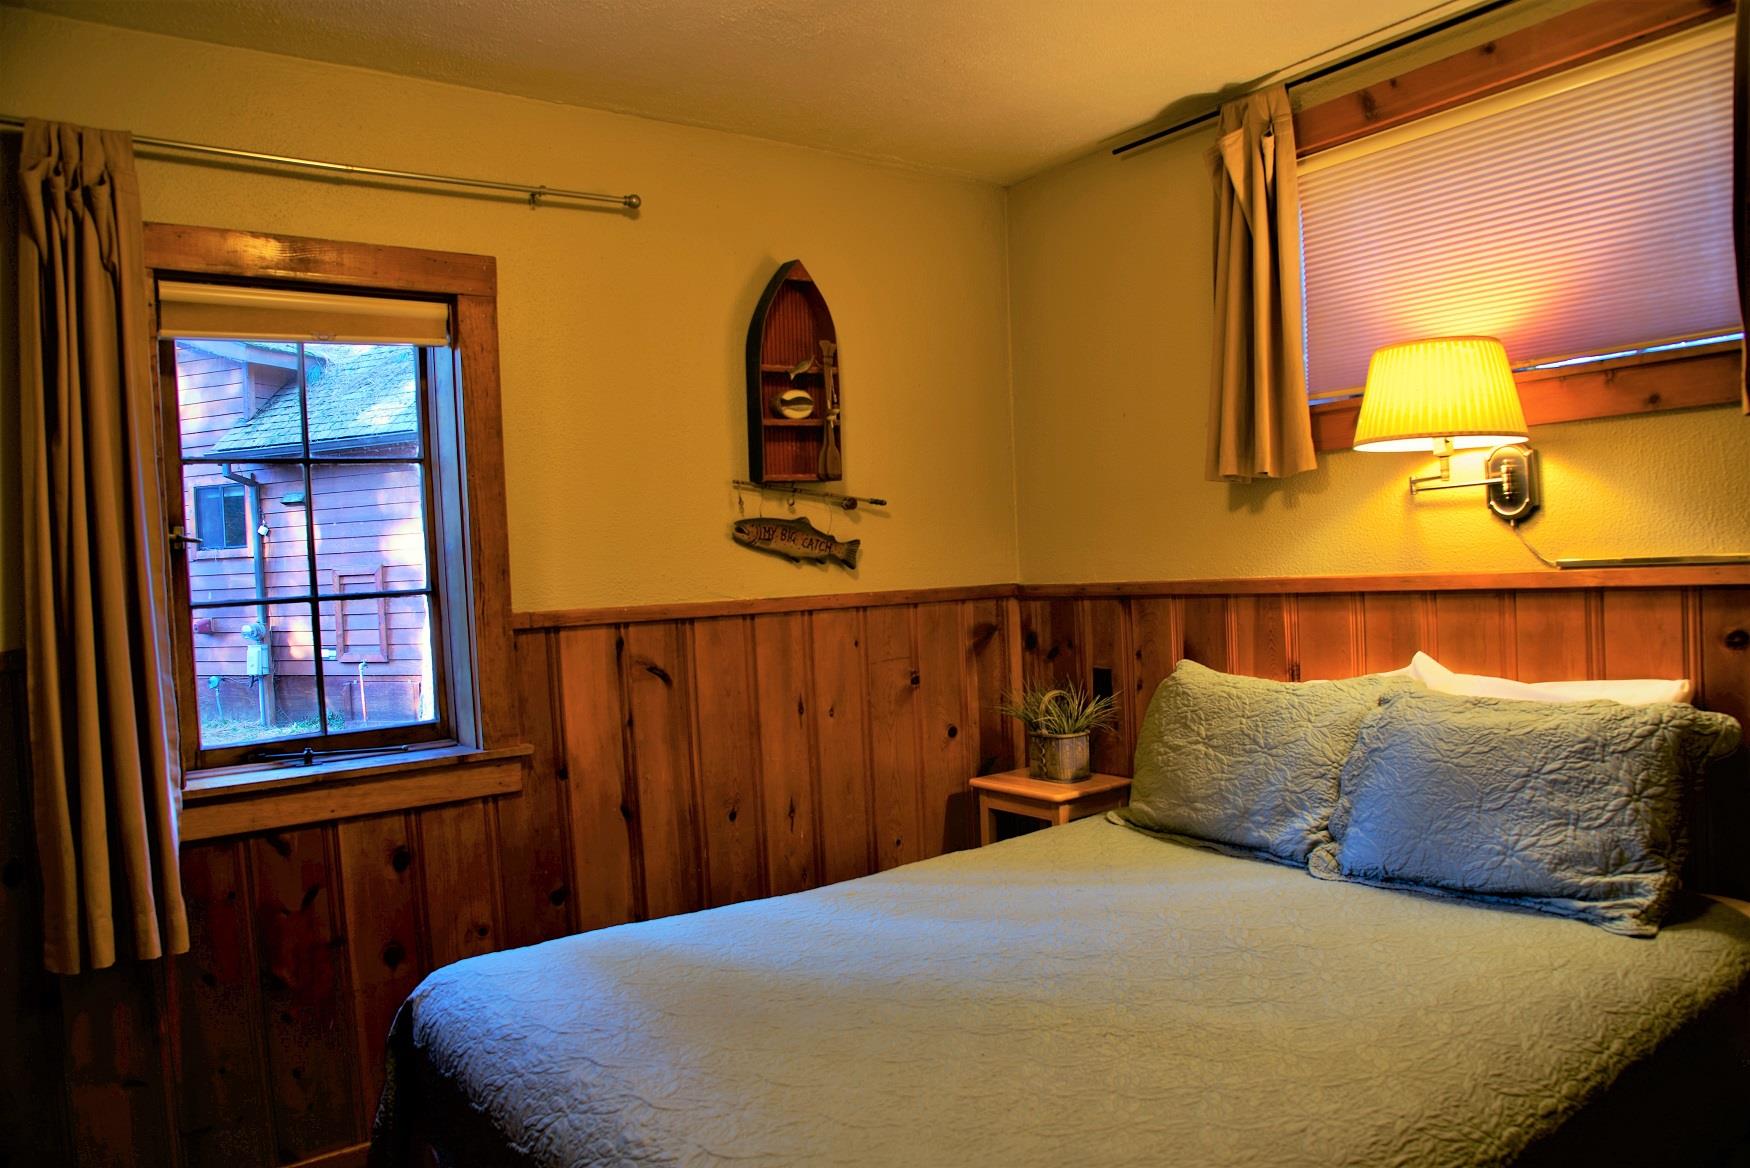 Get your best night sleep in the comfy queen bed in Log Cabin, at Cold Springs Resort & RV Park in Camp Sherman, Oregon